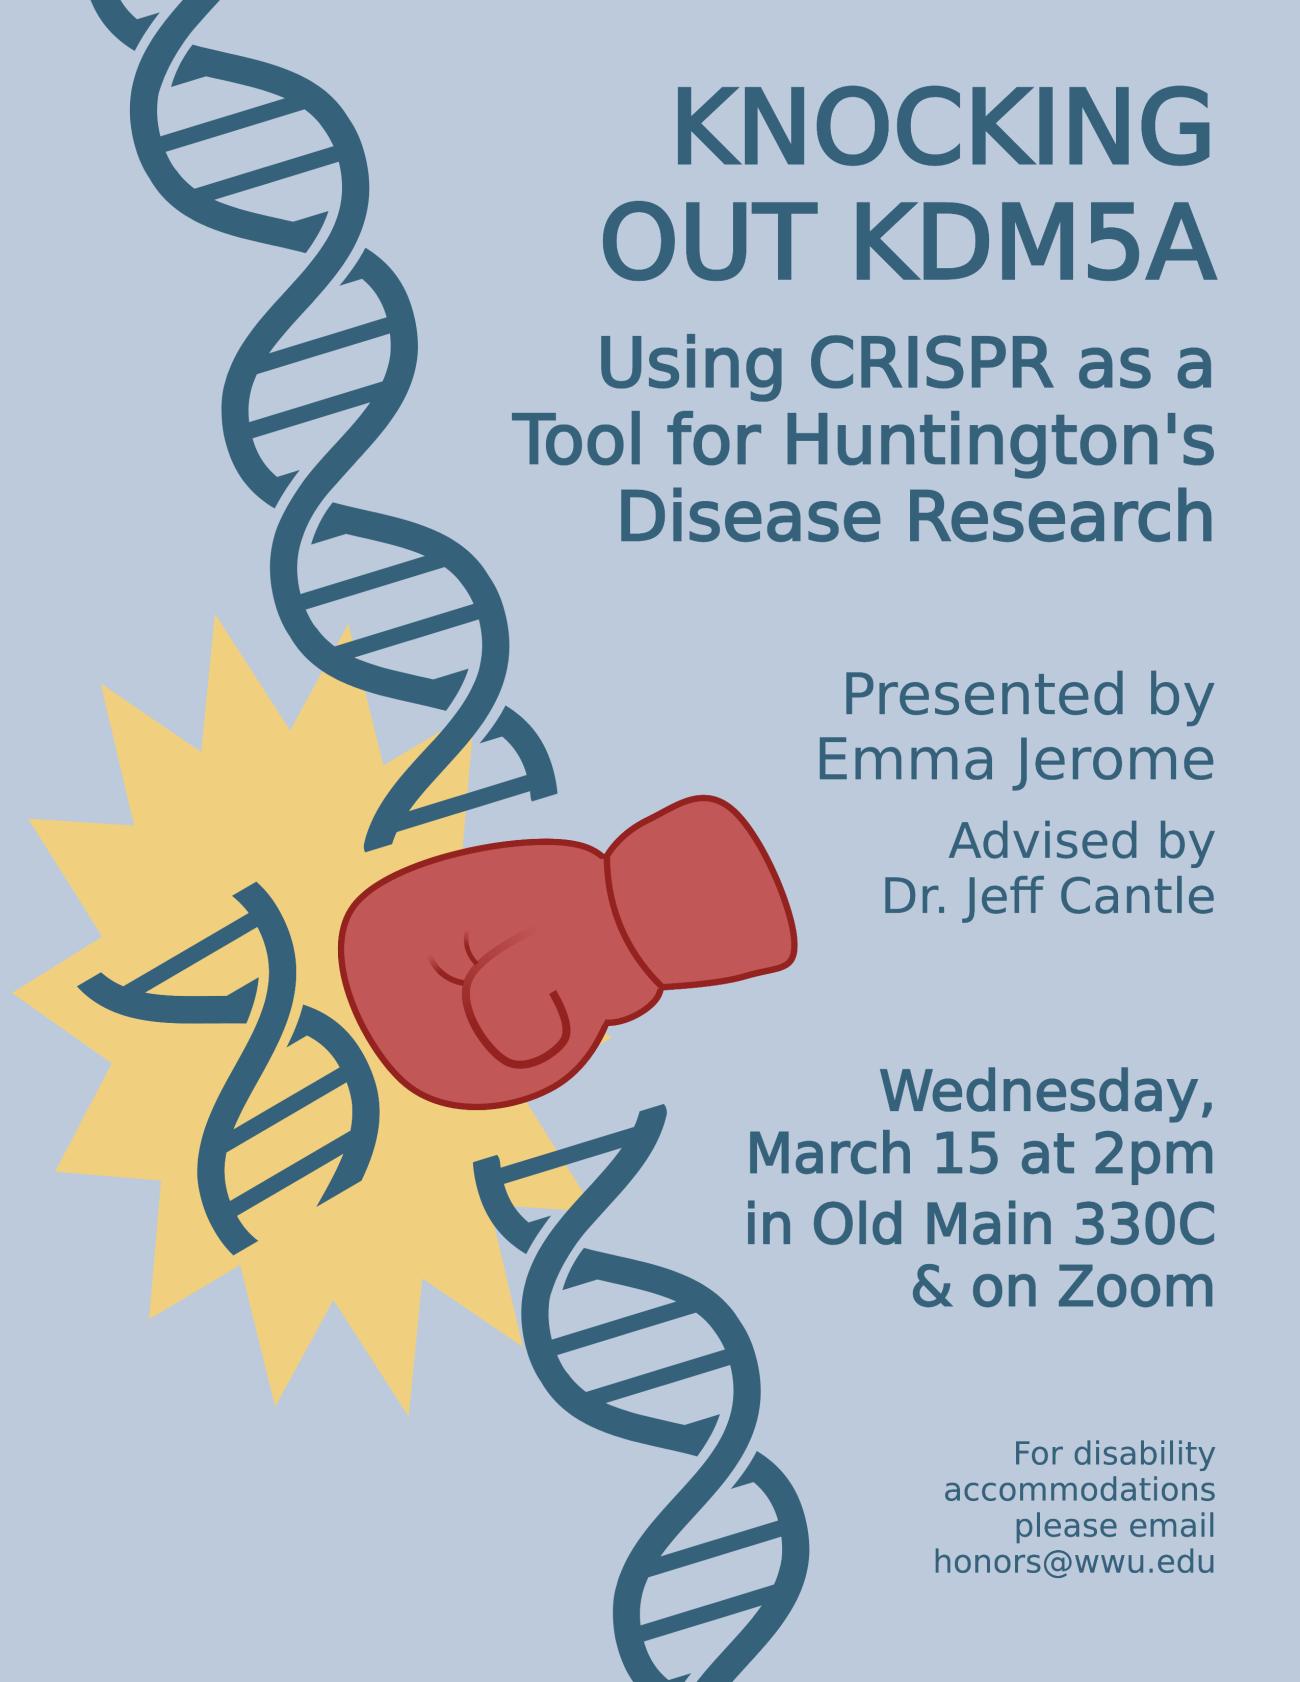 A light blue poster with an illustration of a red boxing glove breaking a strand of DNA. Text reads: “Knocking out Kdm5a – Using CRISPR as a tool for Huntington’s disease research. Presented by Emma Jerome. Advised by Dr. Jeff Cantle. Wednesday, March 15 at 2pm in Old Main 330C and on Zoom. For disability accommodations please email honors@wwu.edu.”